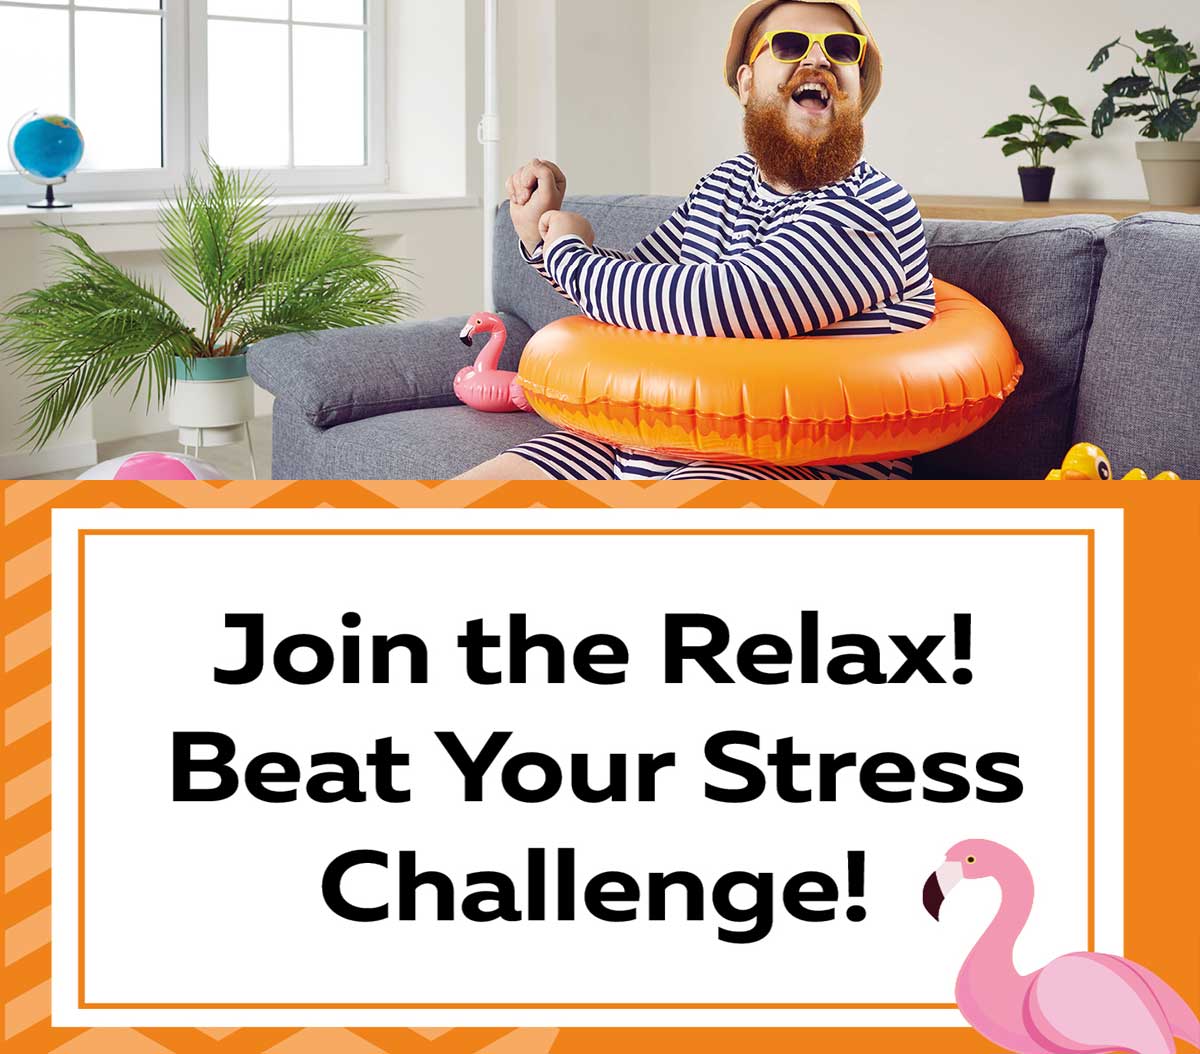 Join the Relax! Beat your stress challenge!